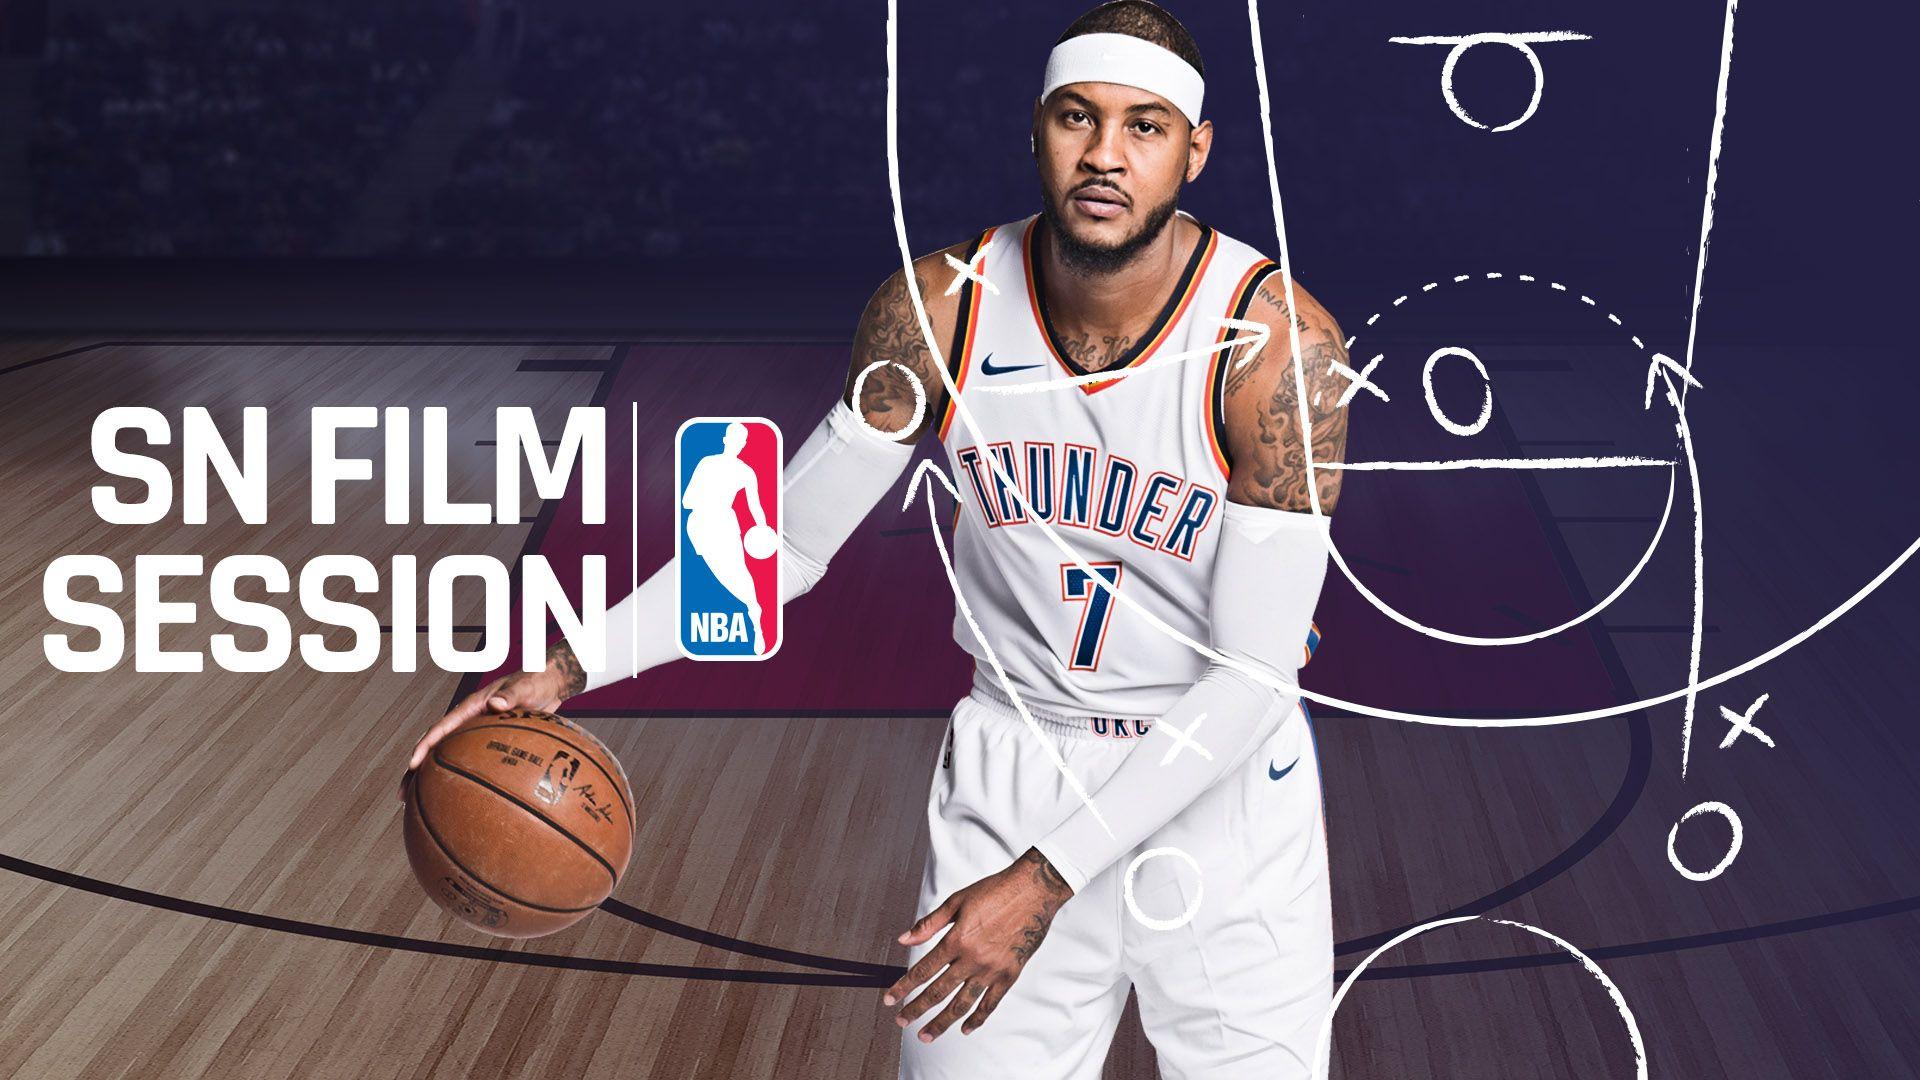 Carmelo Anthony can push Thunder back to elite offensive status